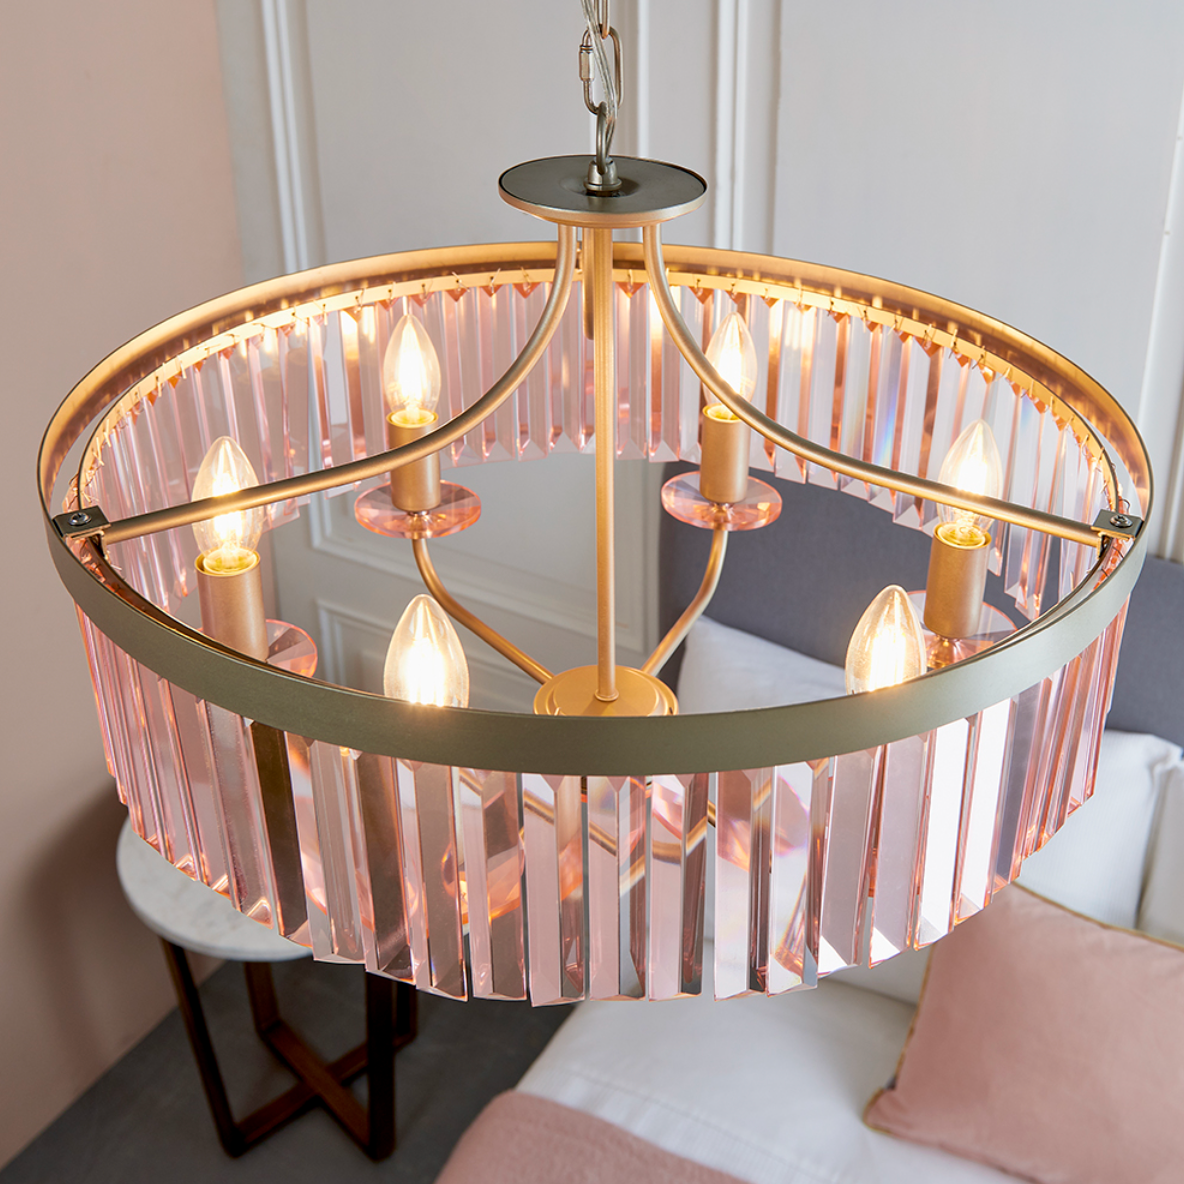 Round champagne and rose pink cut glass chandelier - ID 11743